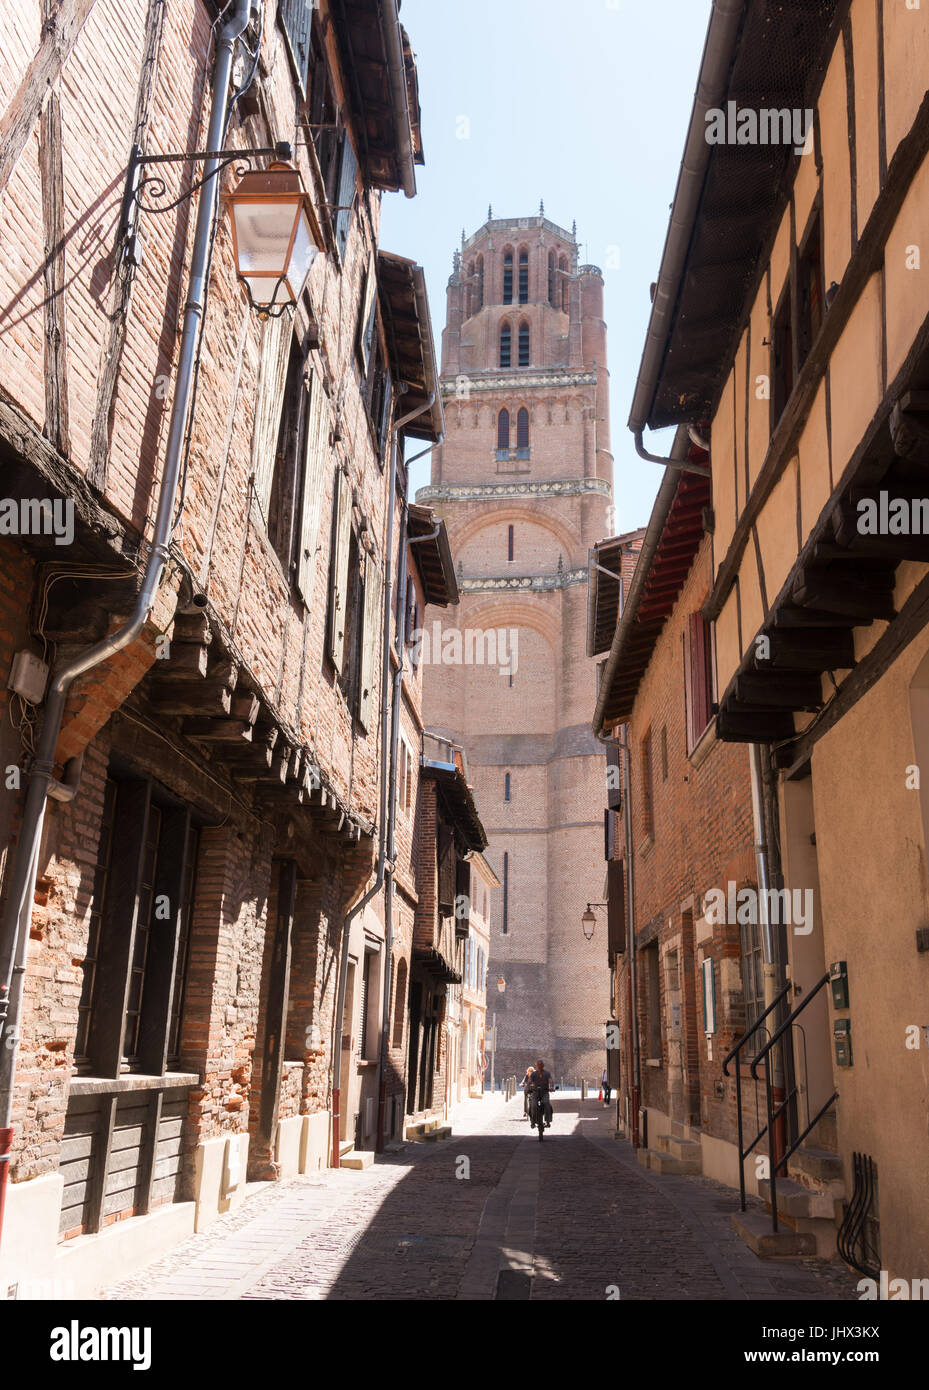 The tower of Albi cathedral seen from the  Rue du Castelviel in the old town, France Stock Photo